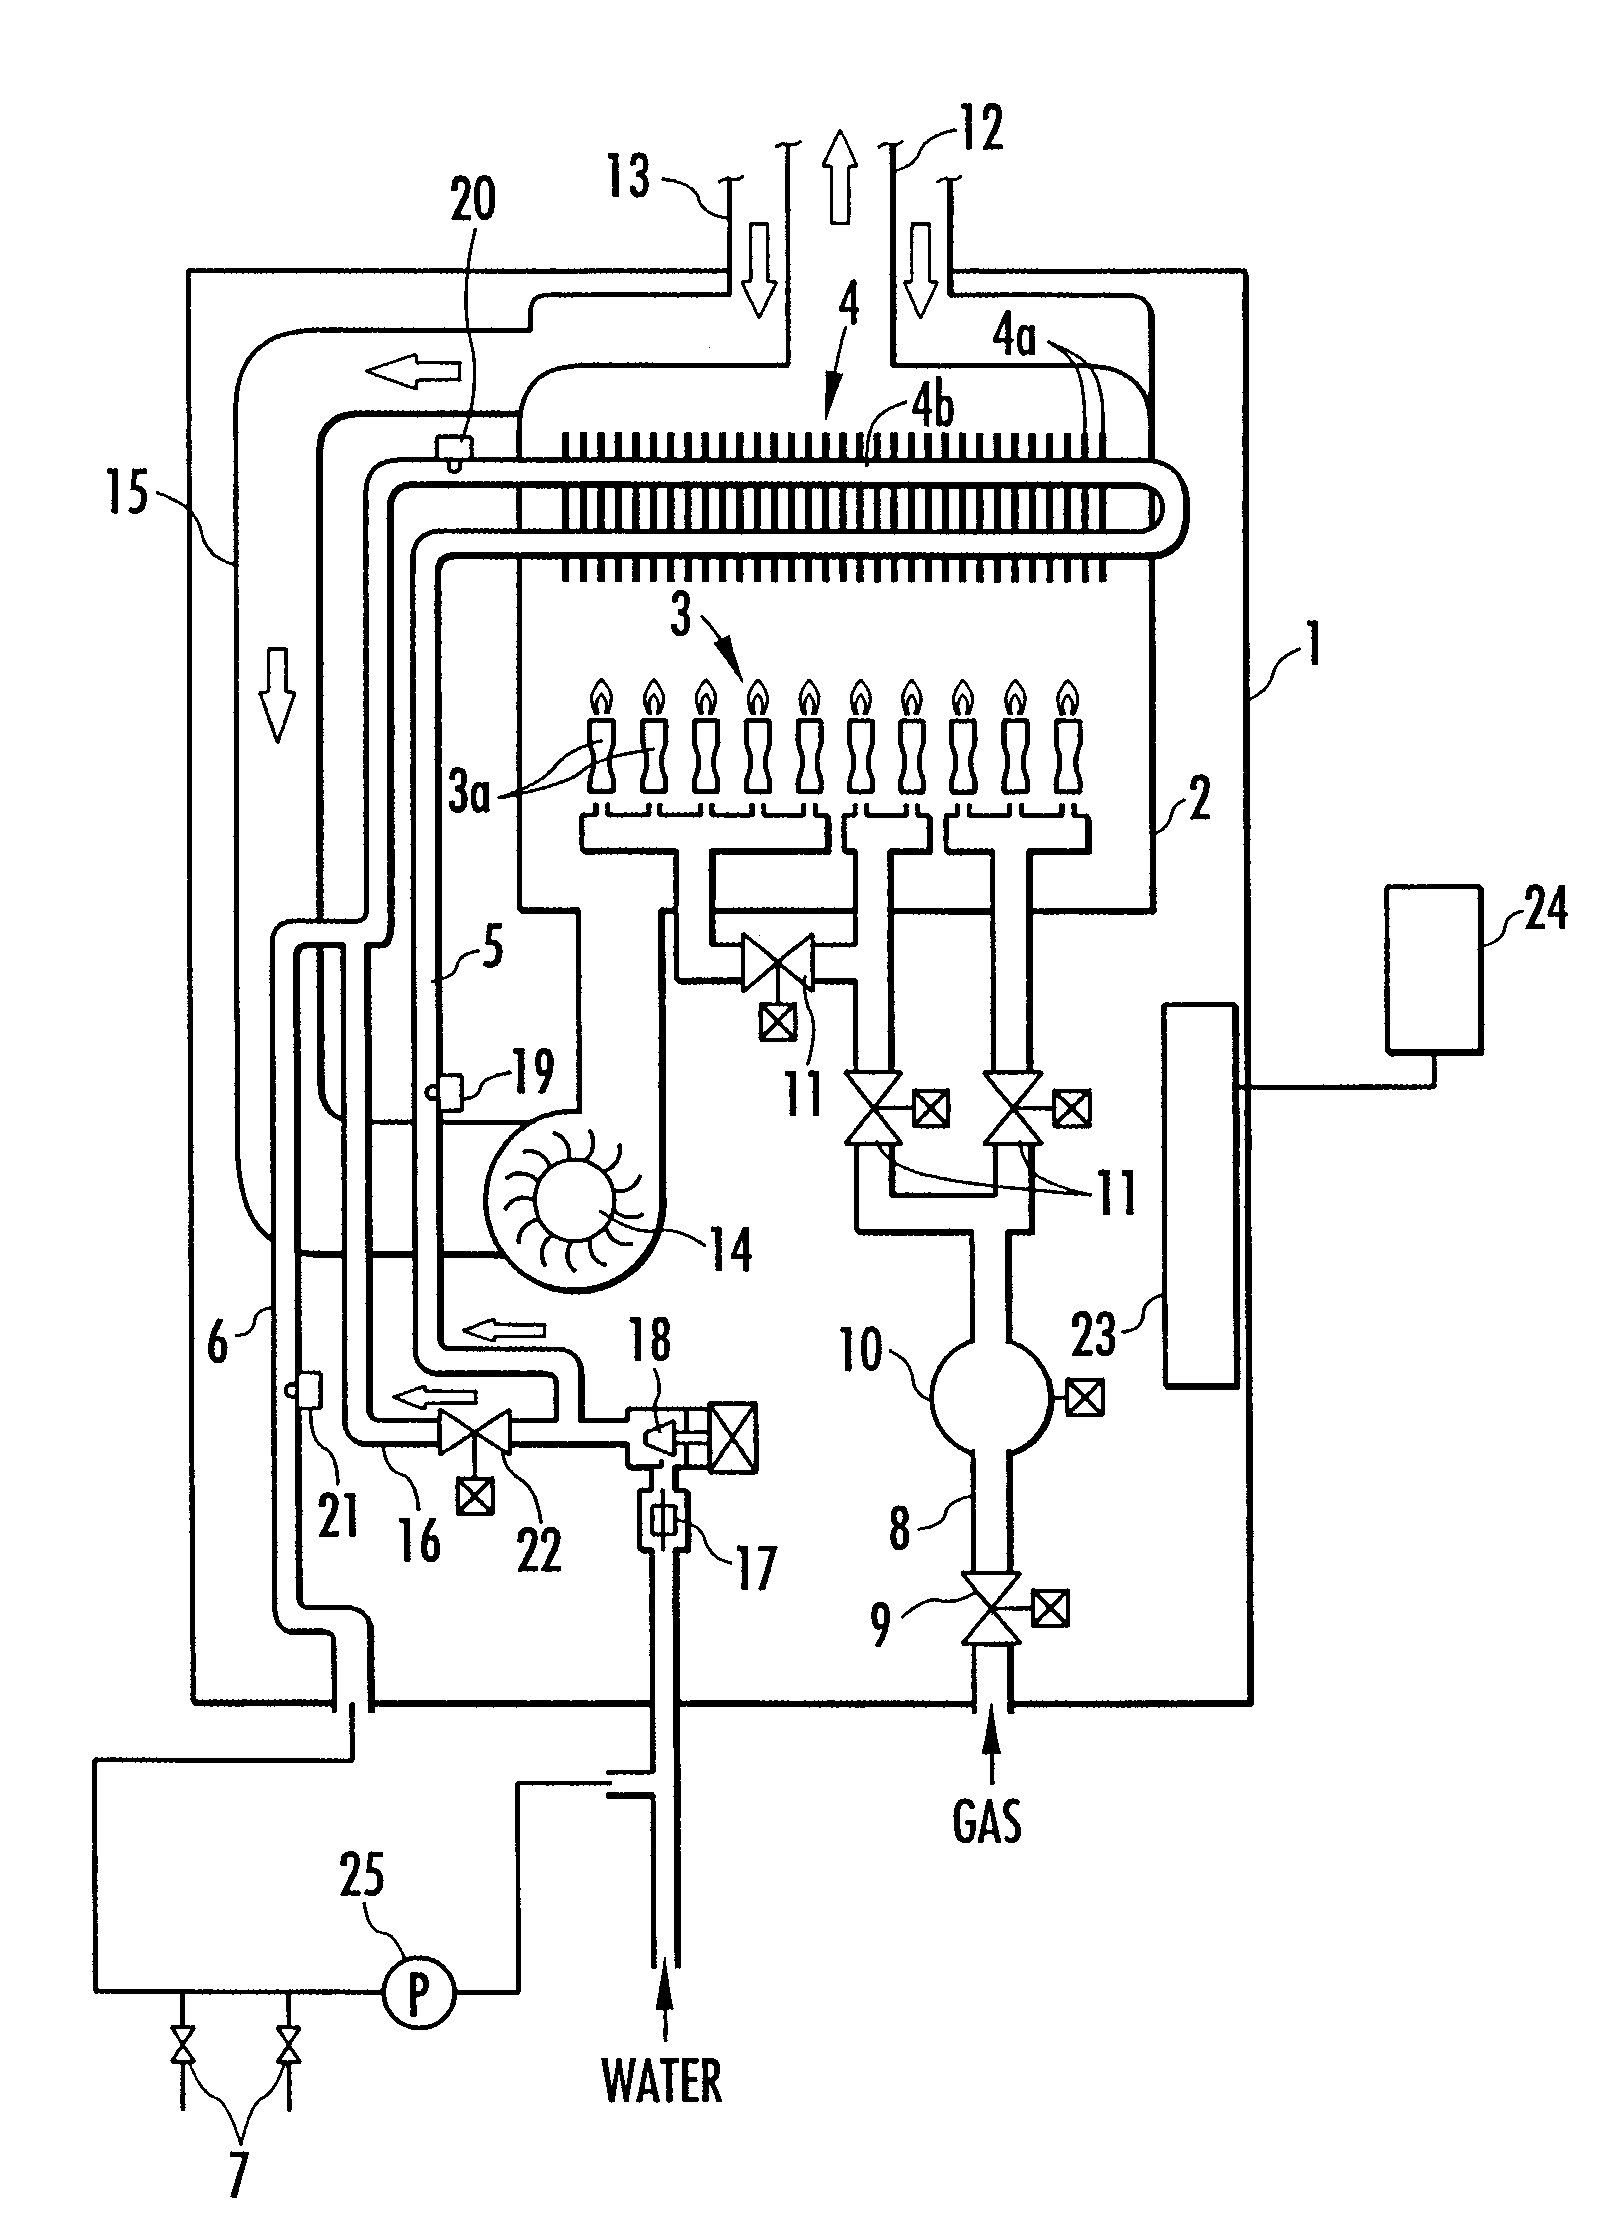 Circulation type hot water supply device